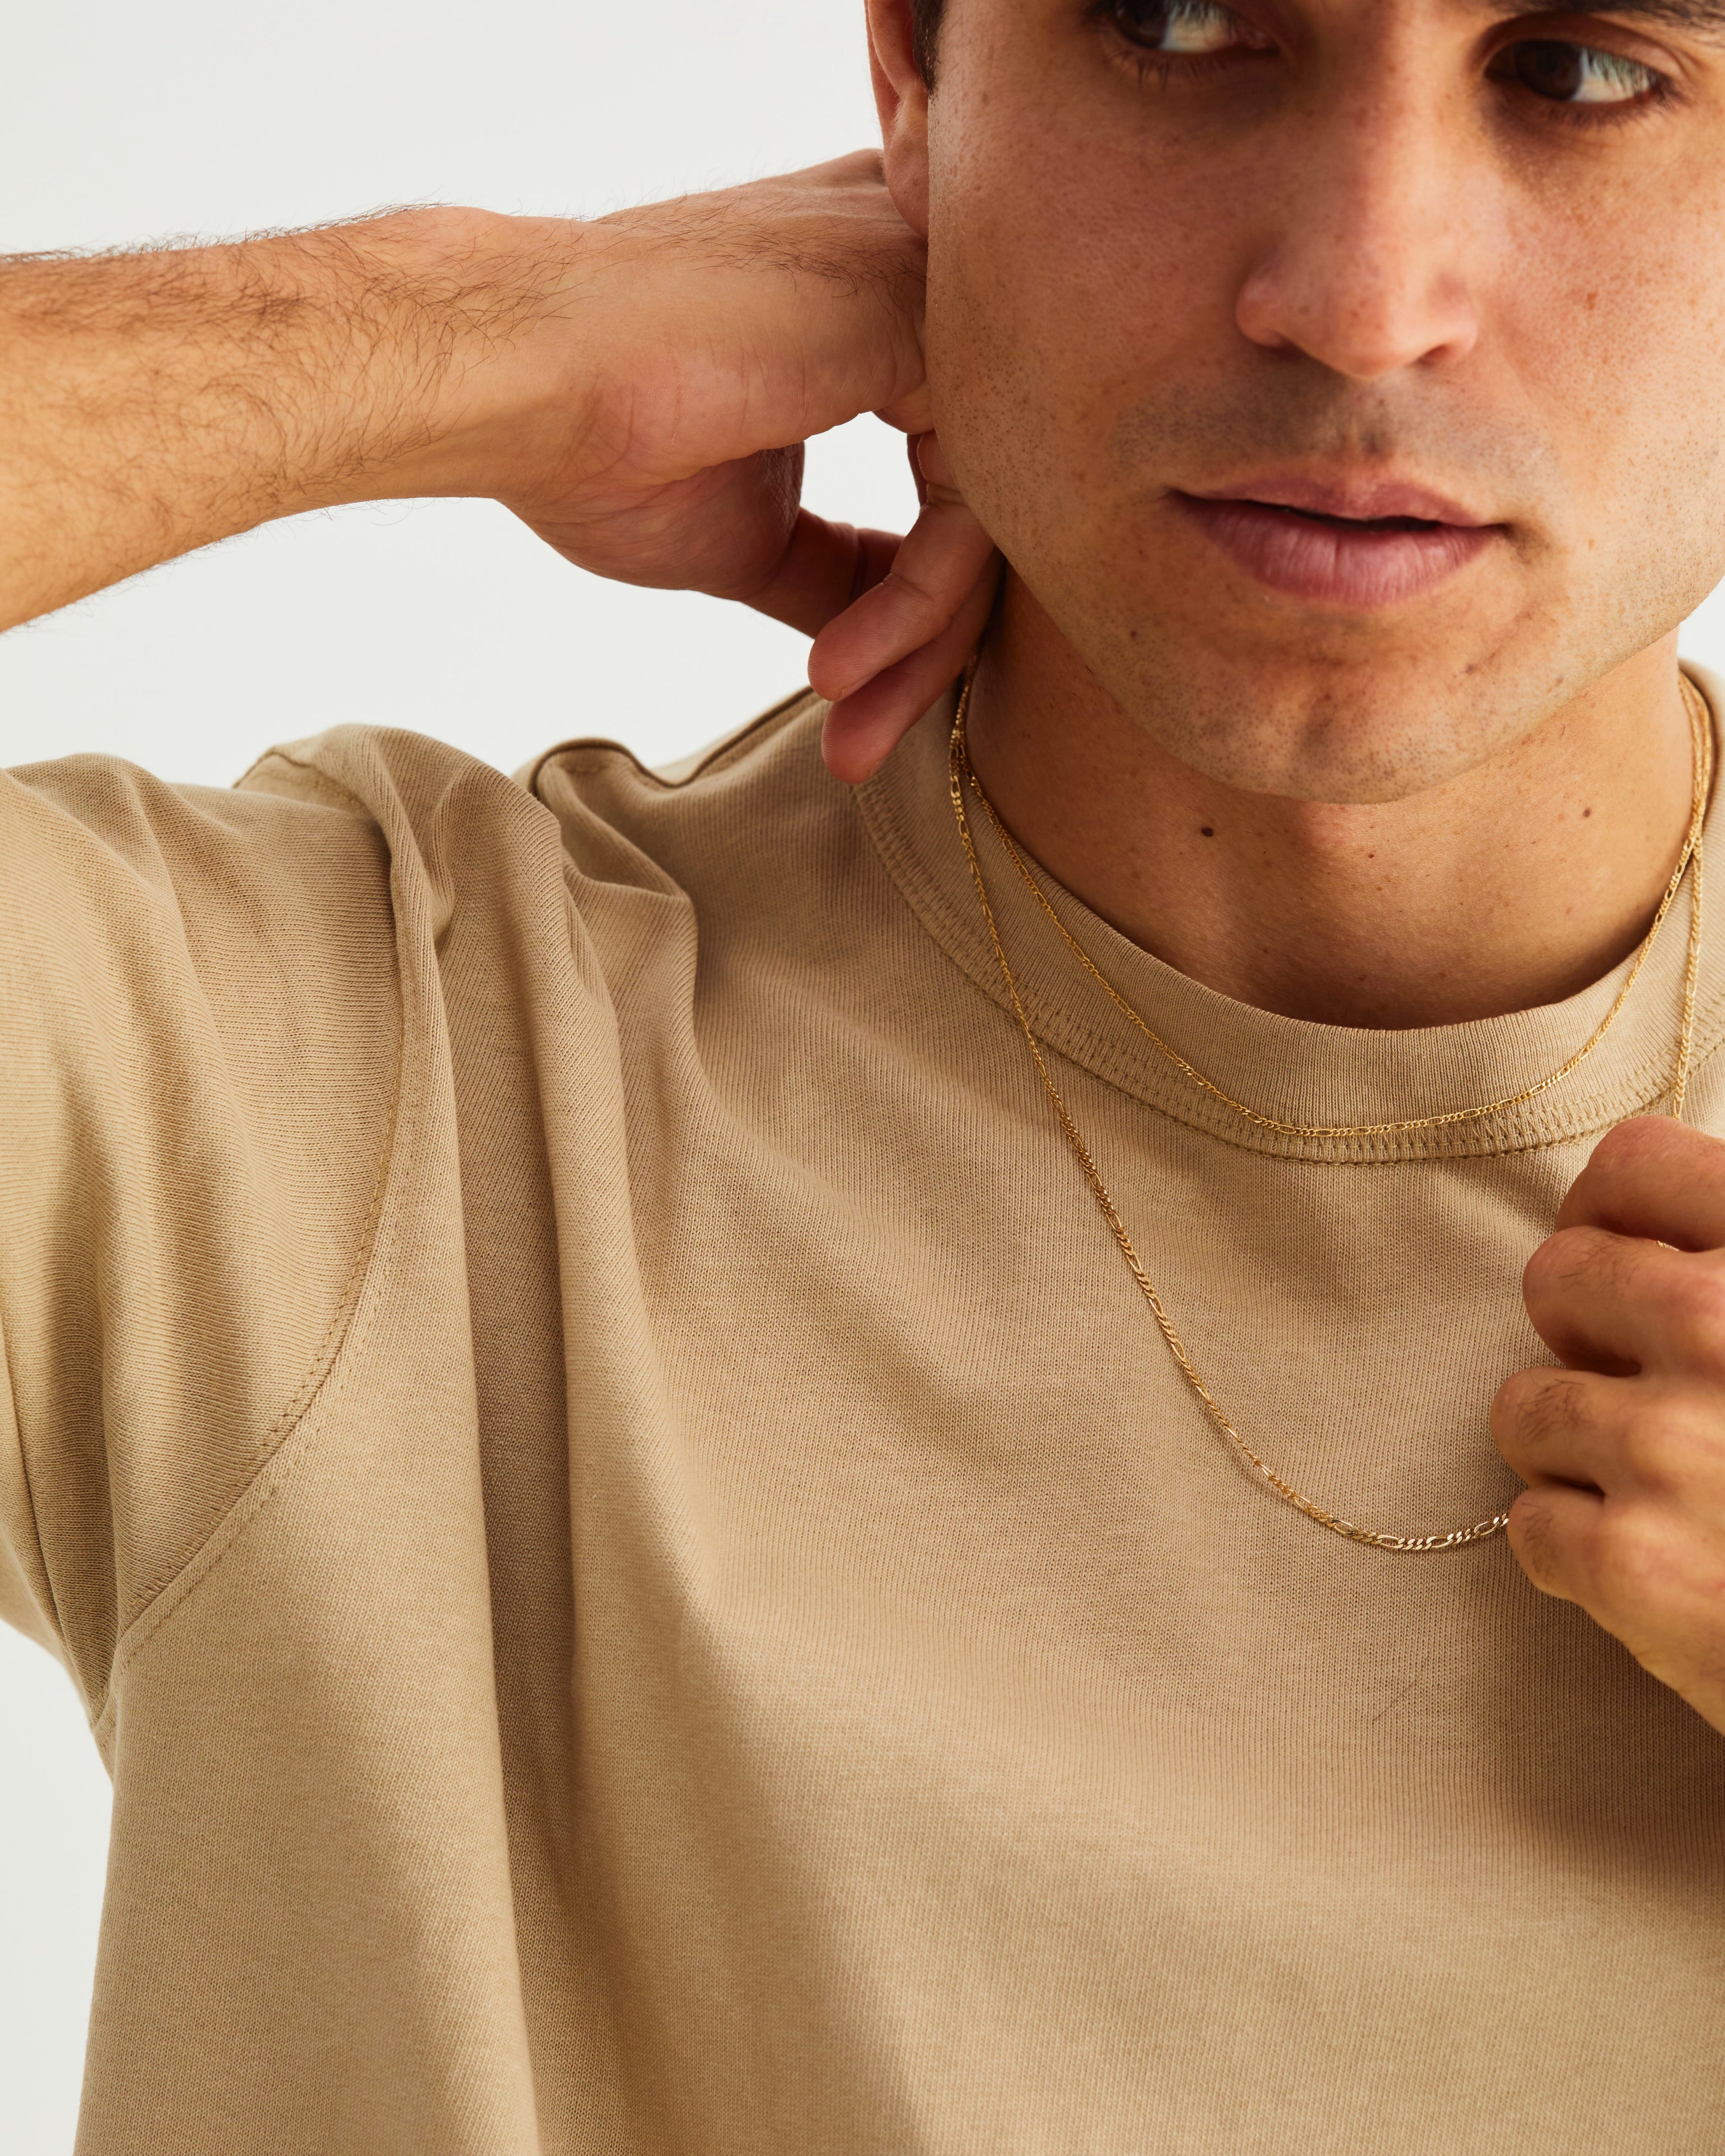 A man wears the fine Figaro chain necklace (shorter) layered with a bold Figaro chain necklace, both in yellow gold